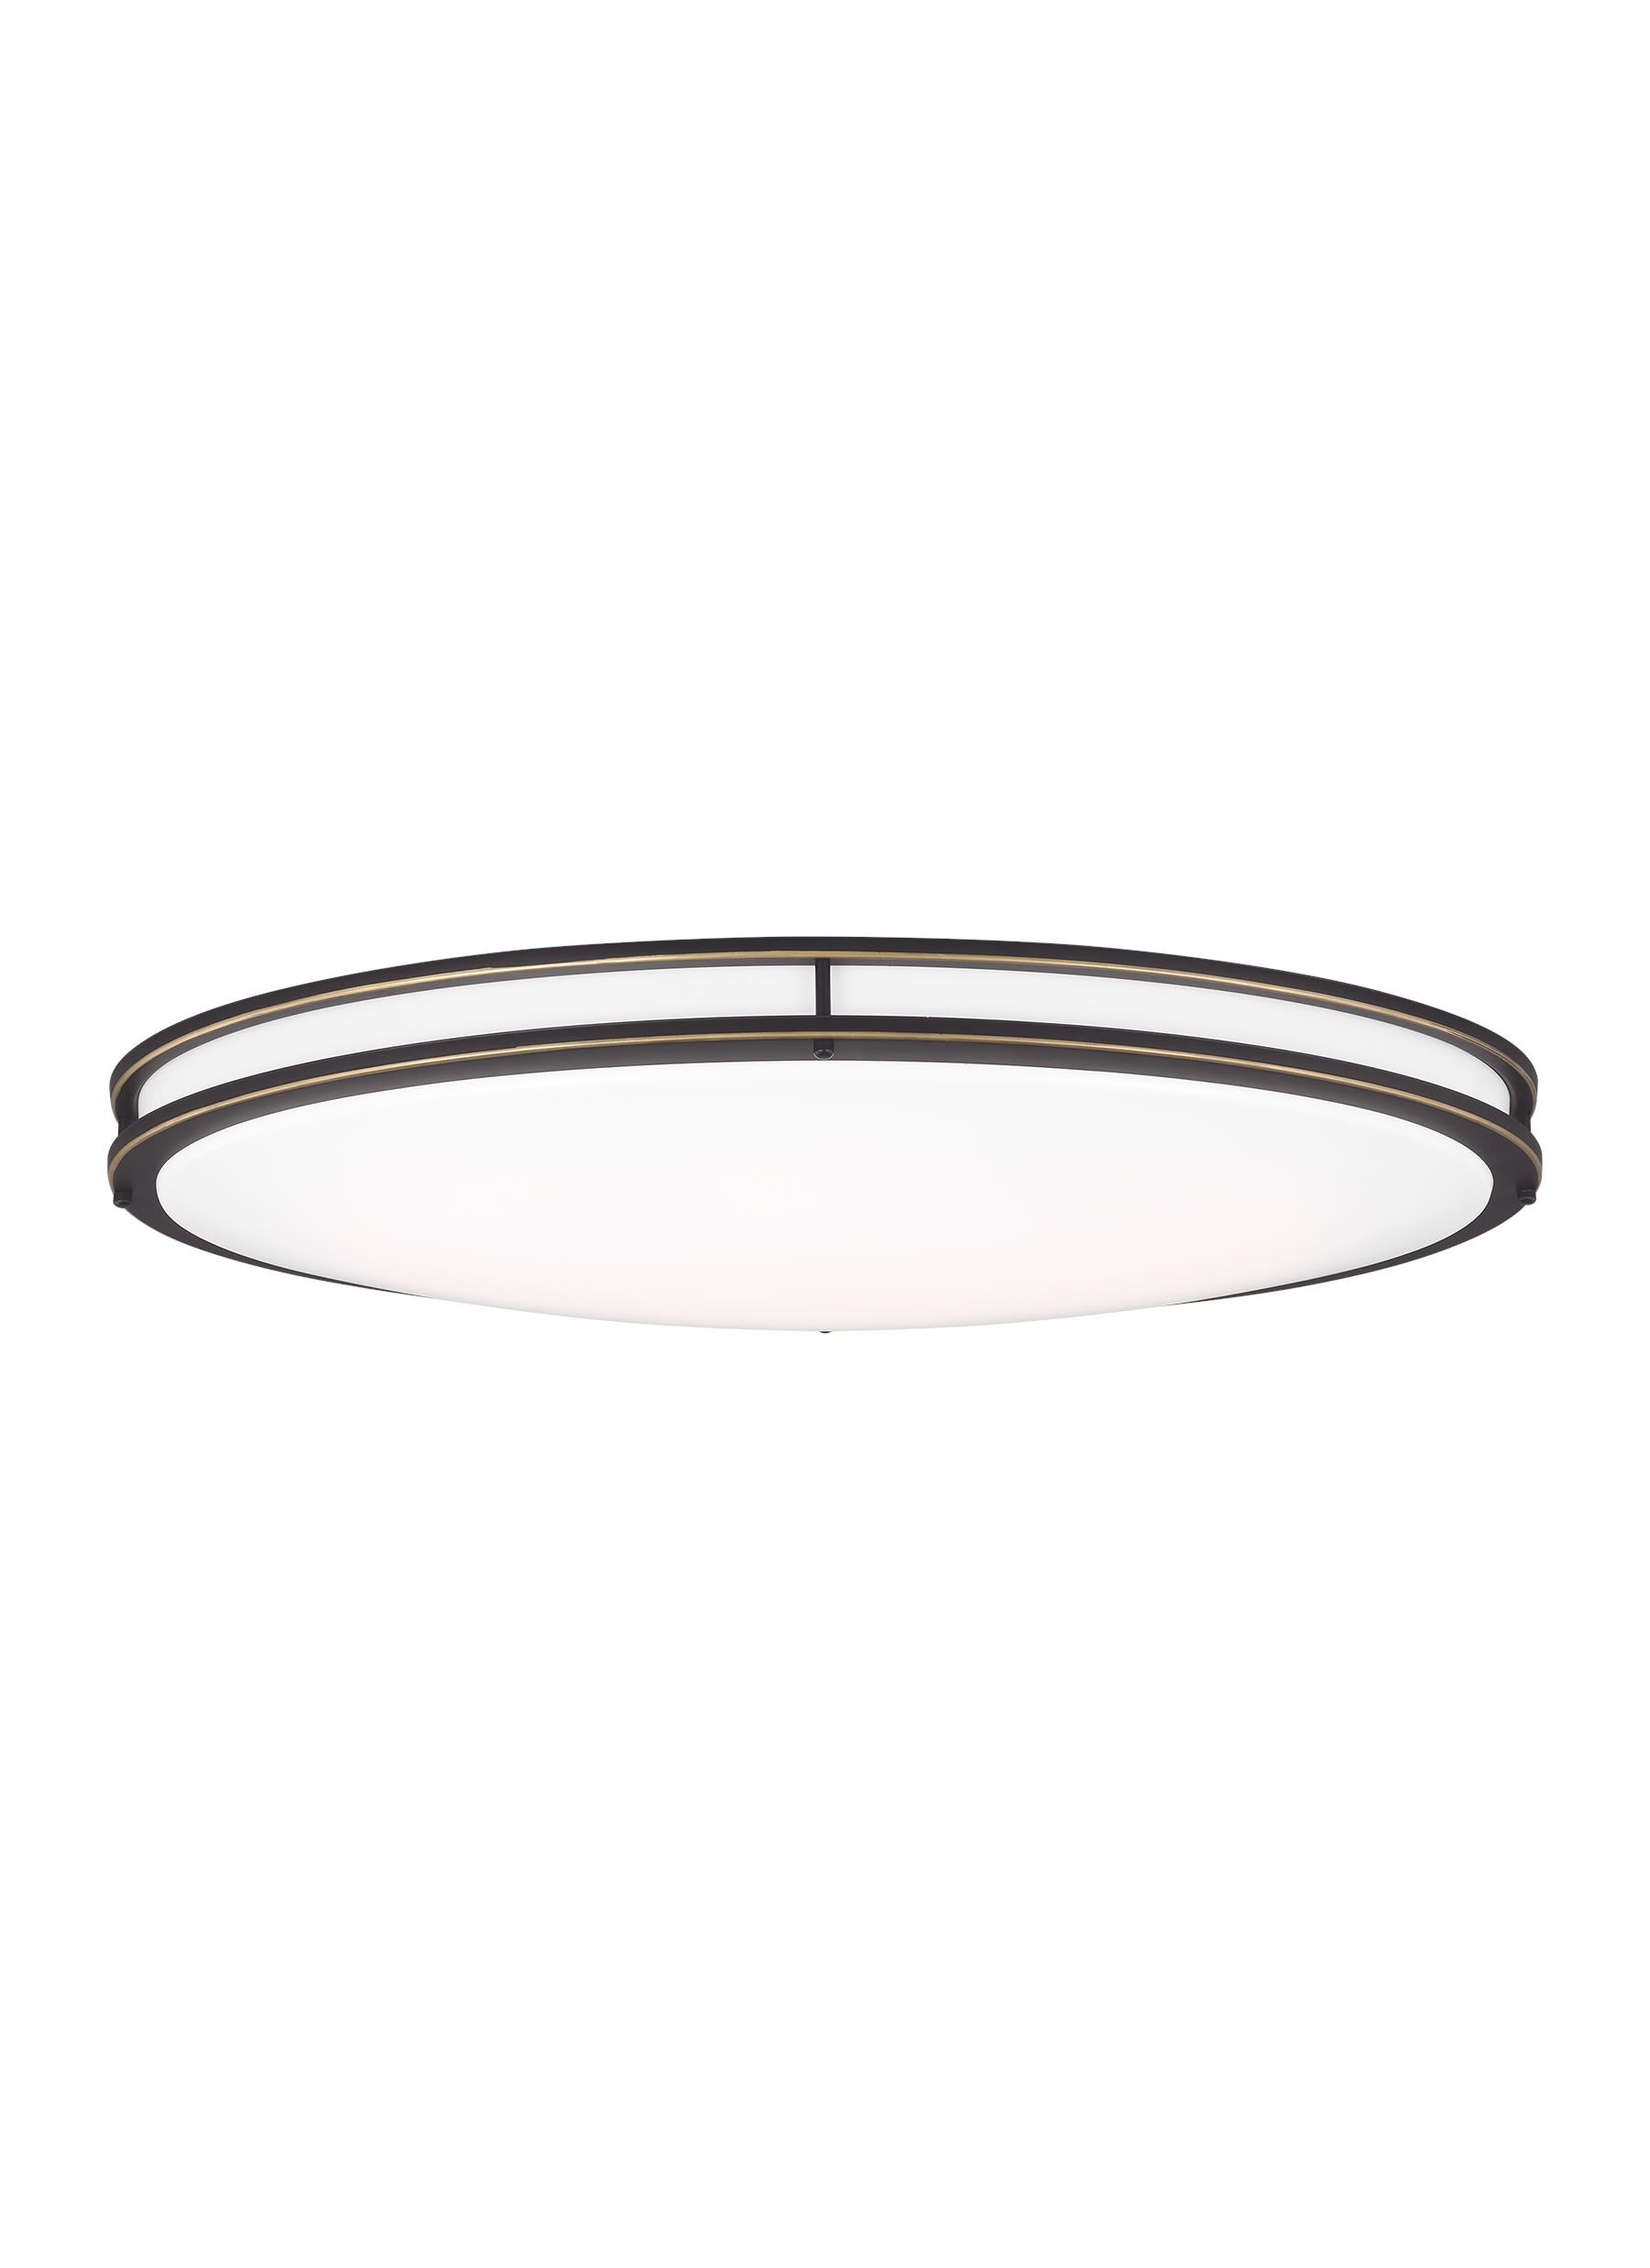 Mahone traditional dimmable indoor large LED oval 1-light flush mount ceiling fixture in an antique bronze finish with whi...